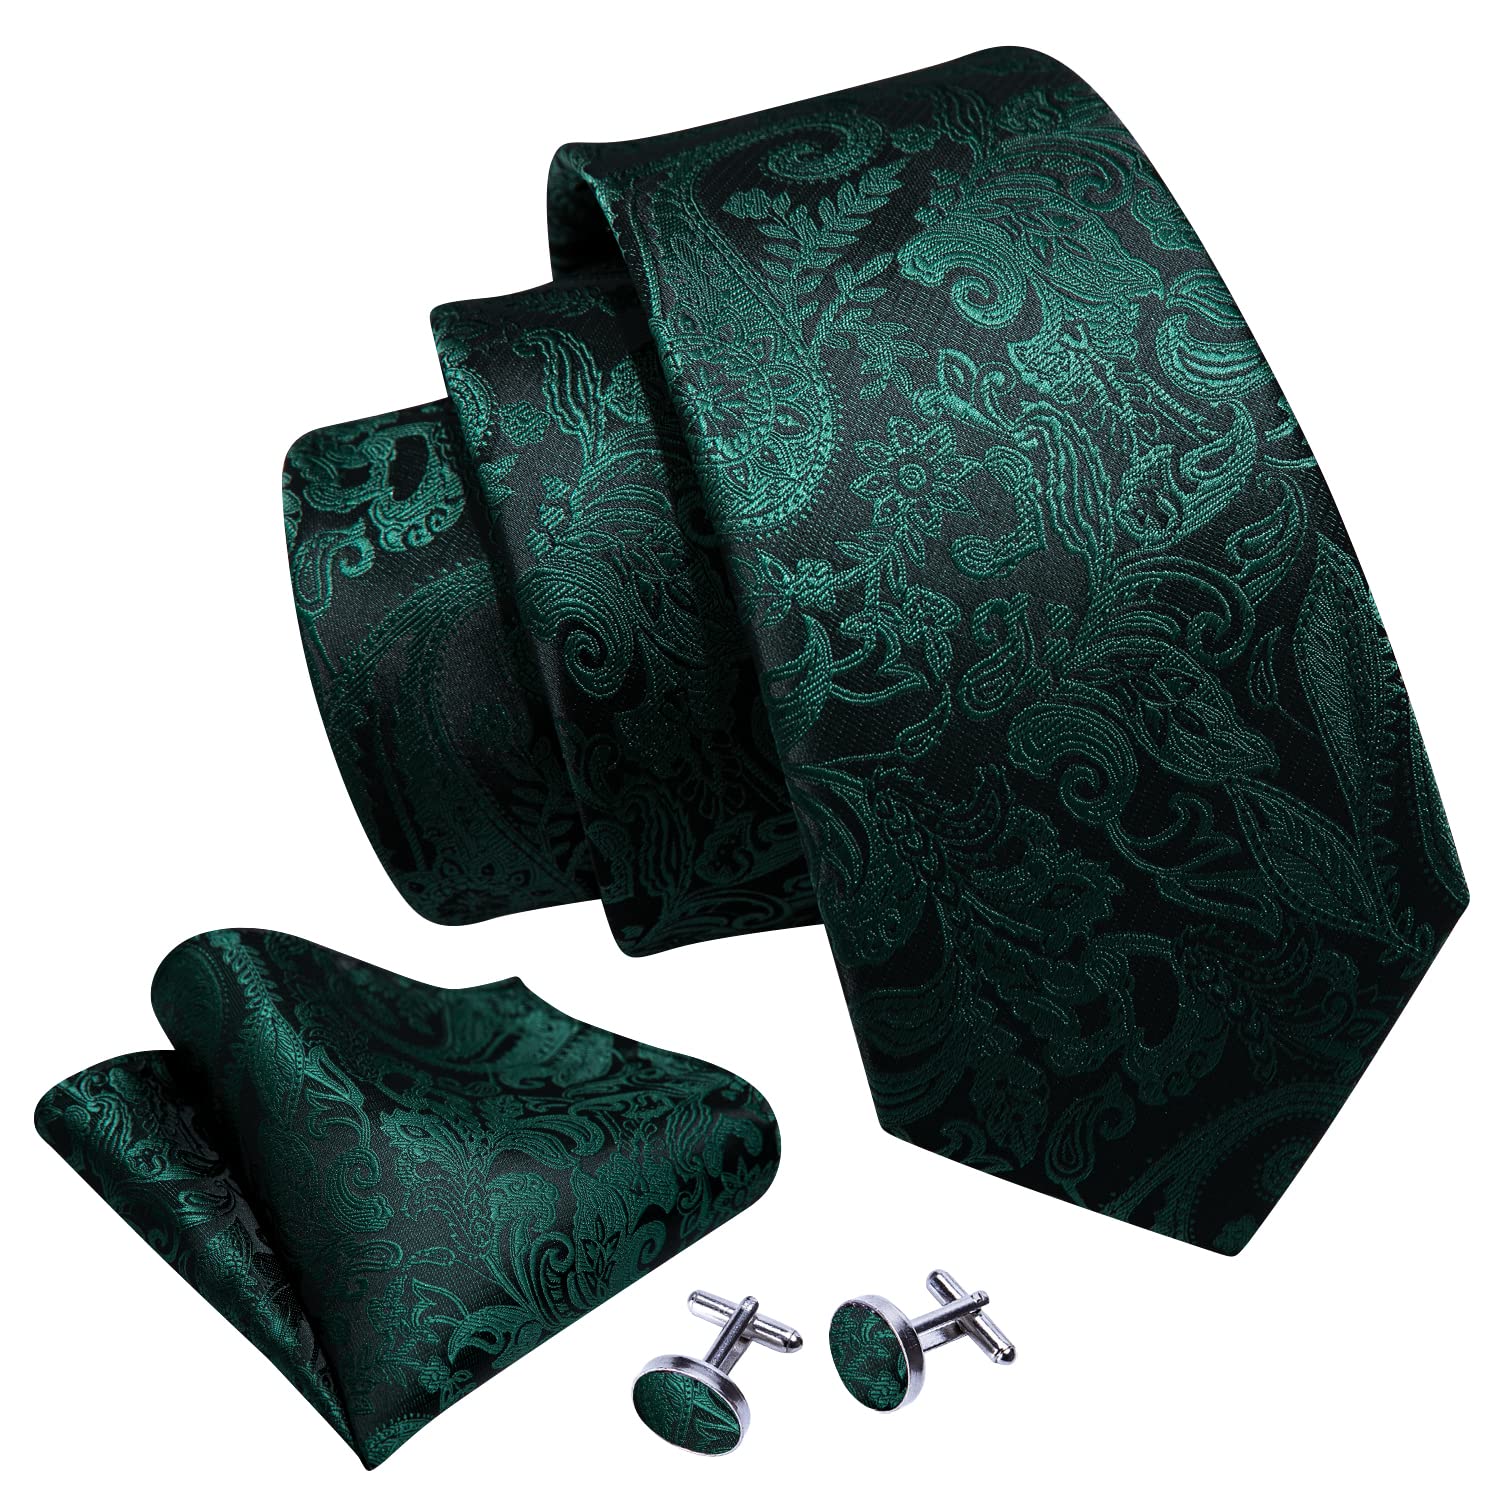 Barry.Wang Mens Ties Silk 4PC Solid Color Paisley Formal Satin Necktie Pocket Square Party Classic Wedding Anniversaries Gift Box